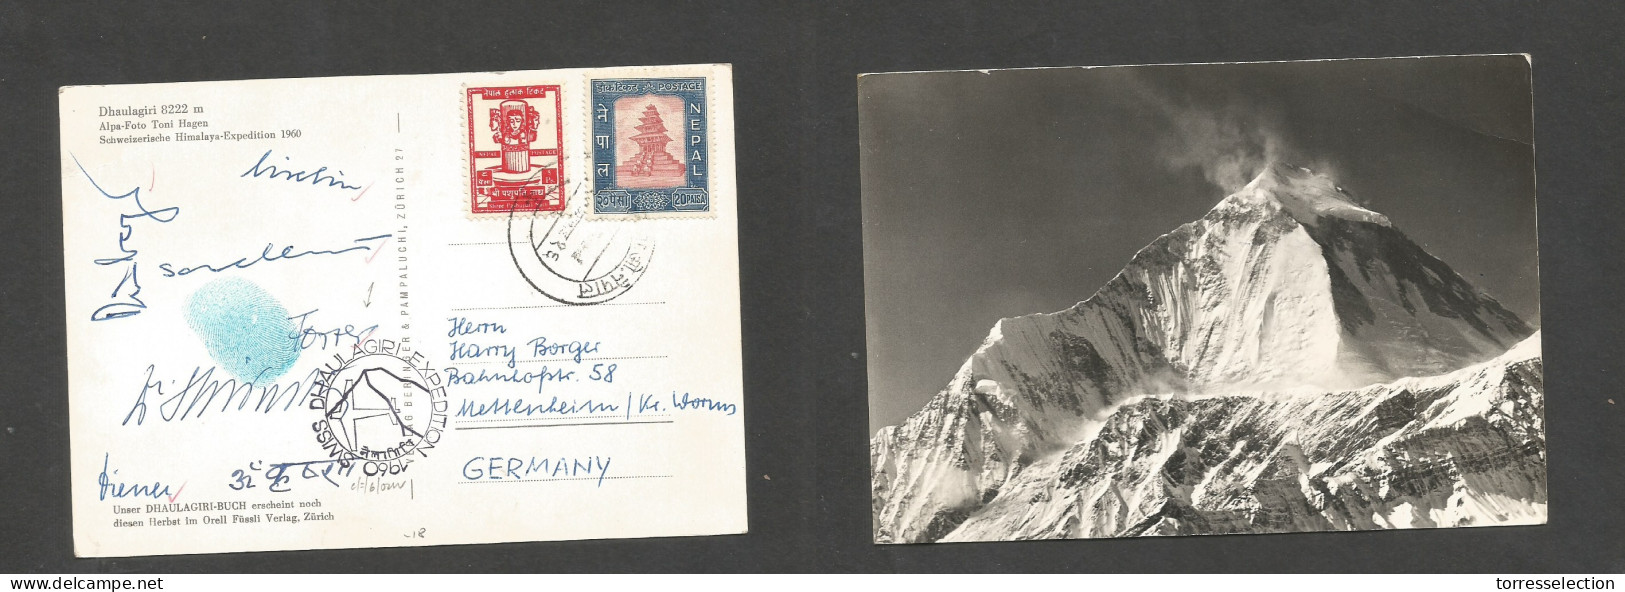 NEPAL. 1960. Commemorative Rise To Himalaya. Signed By 6 Members, One Only His Finger Print (local) Dhaulagini Expeditio - Nepal